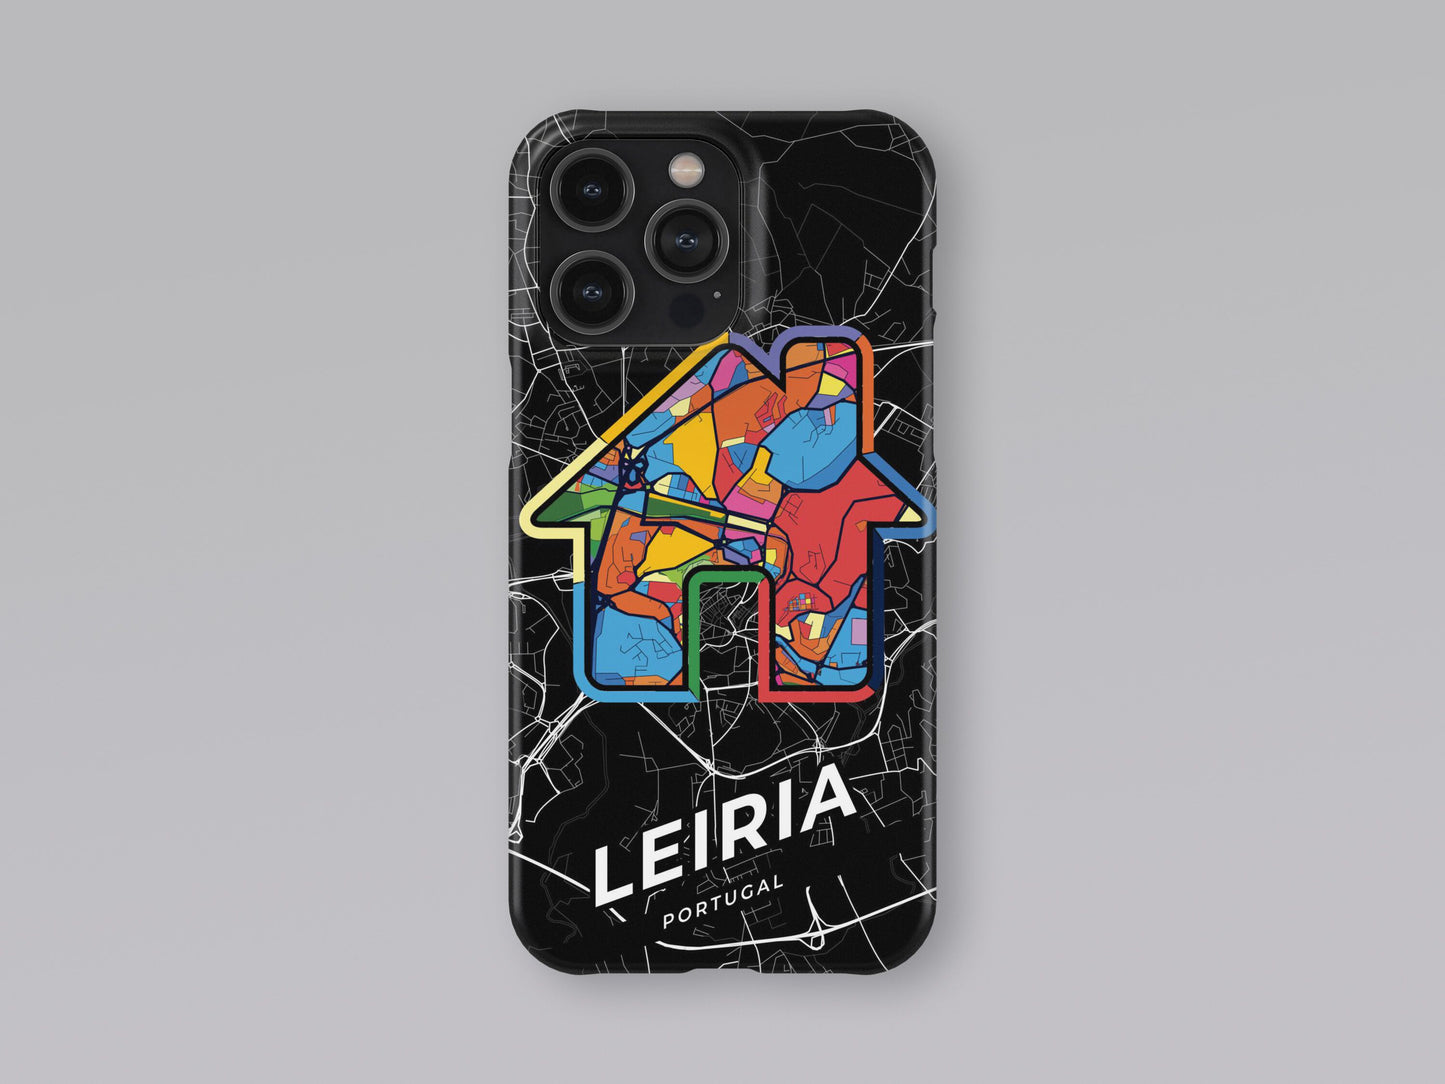 Leiria Portugal slim phone case with colorful icon. Birthday, wedding or housewarming gift. Couple match cases. 3